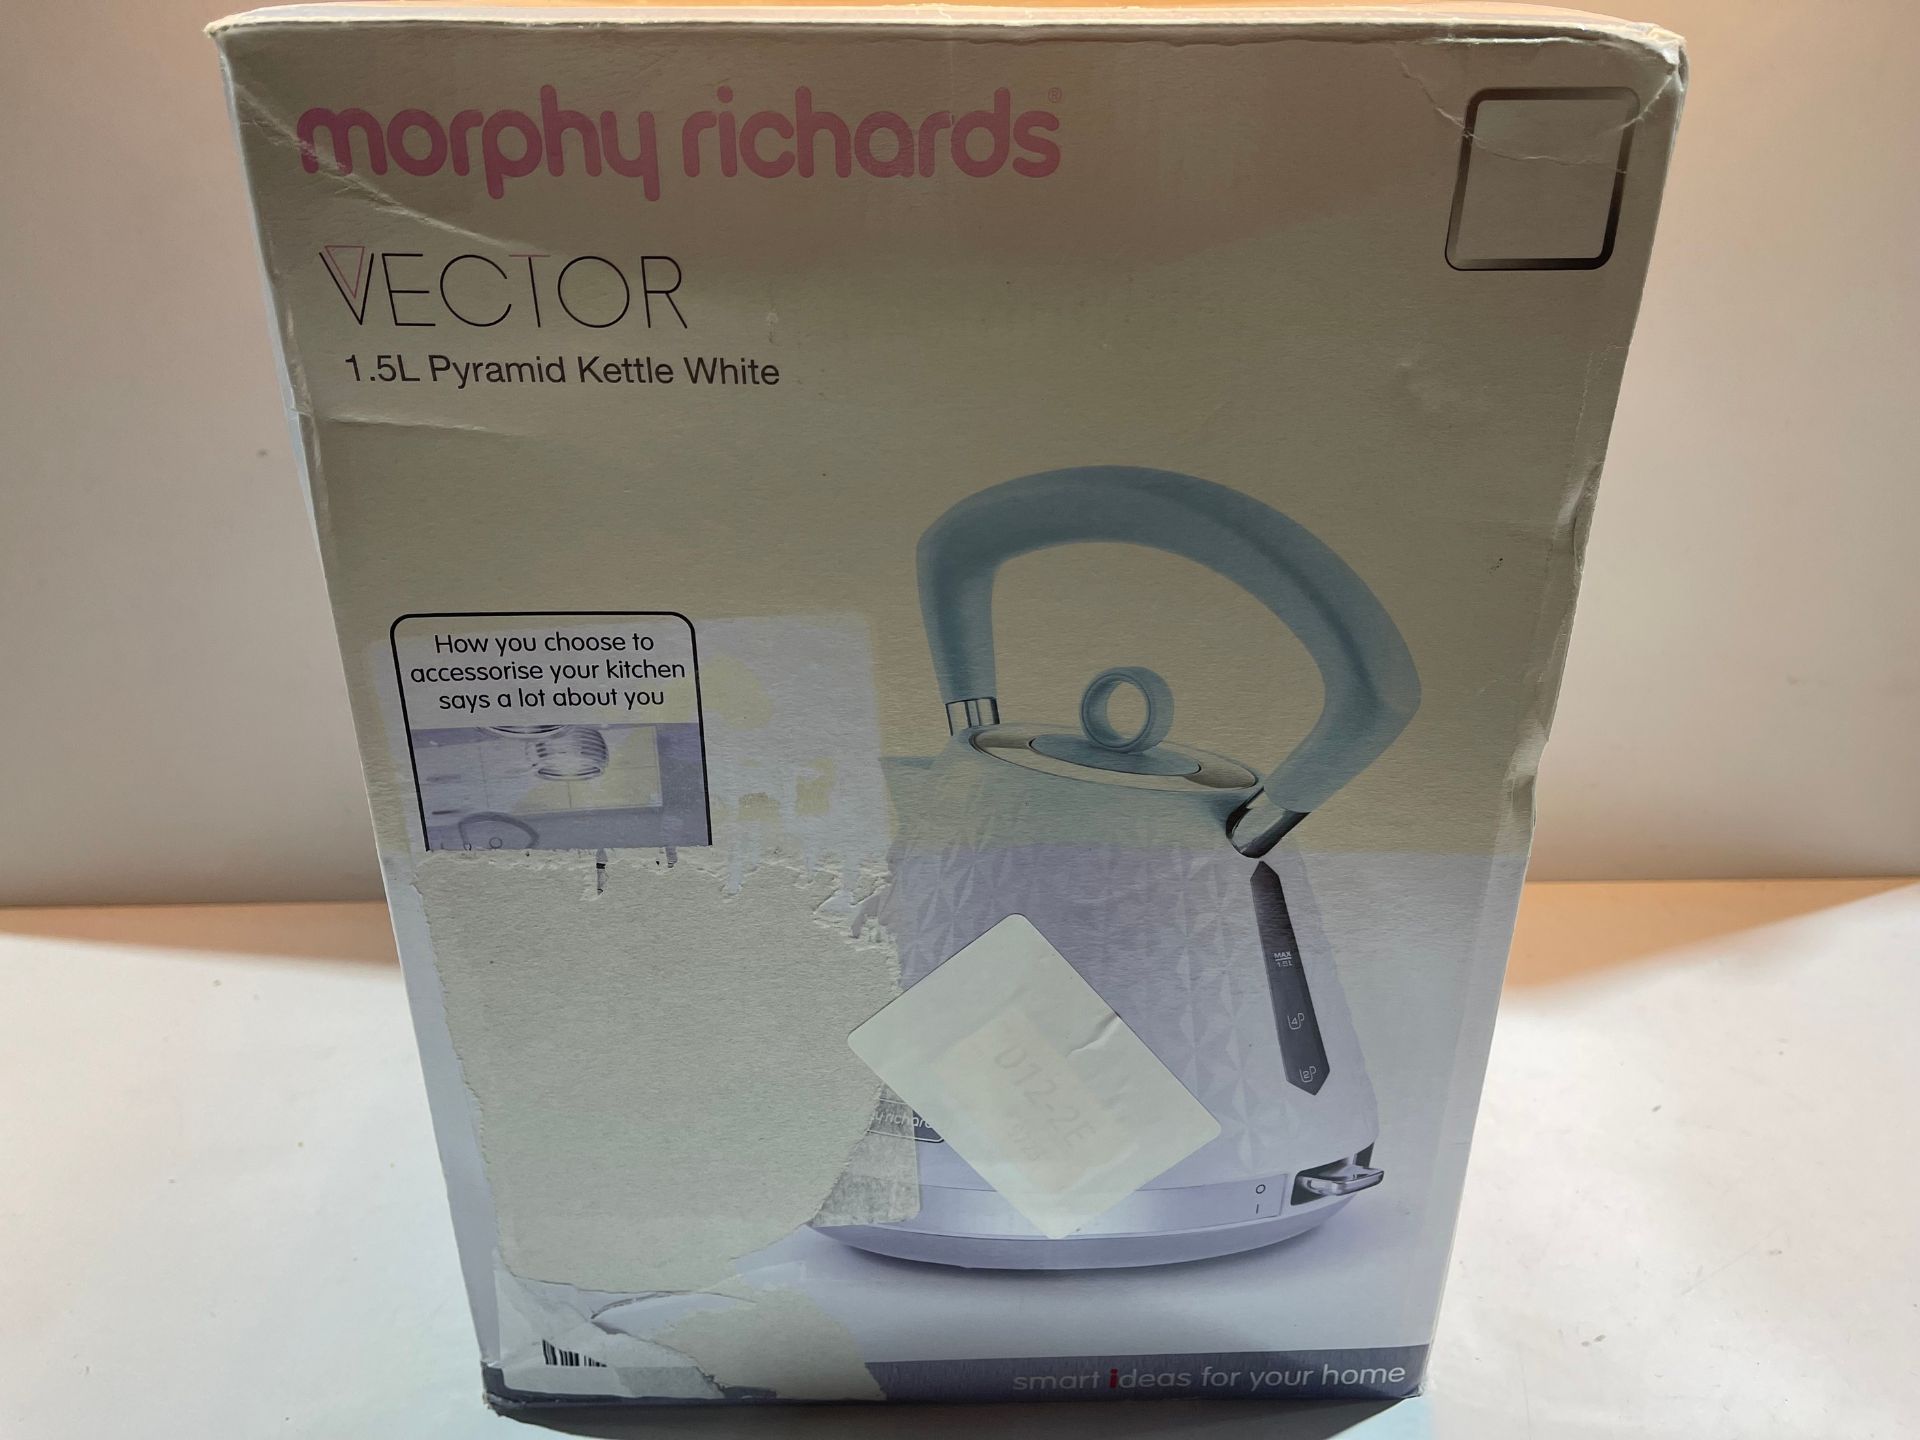 Morphy Richards Vector Pyramid Kettle 108134 Traditional Kettle White £29.99Condition